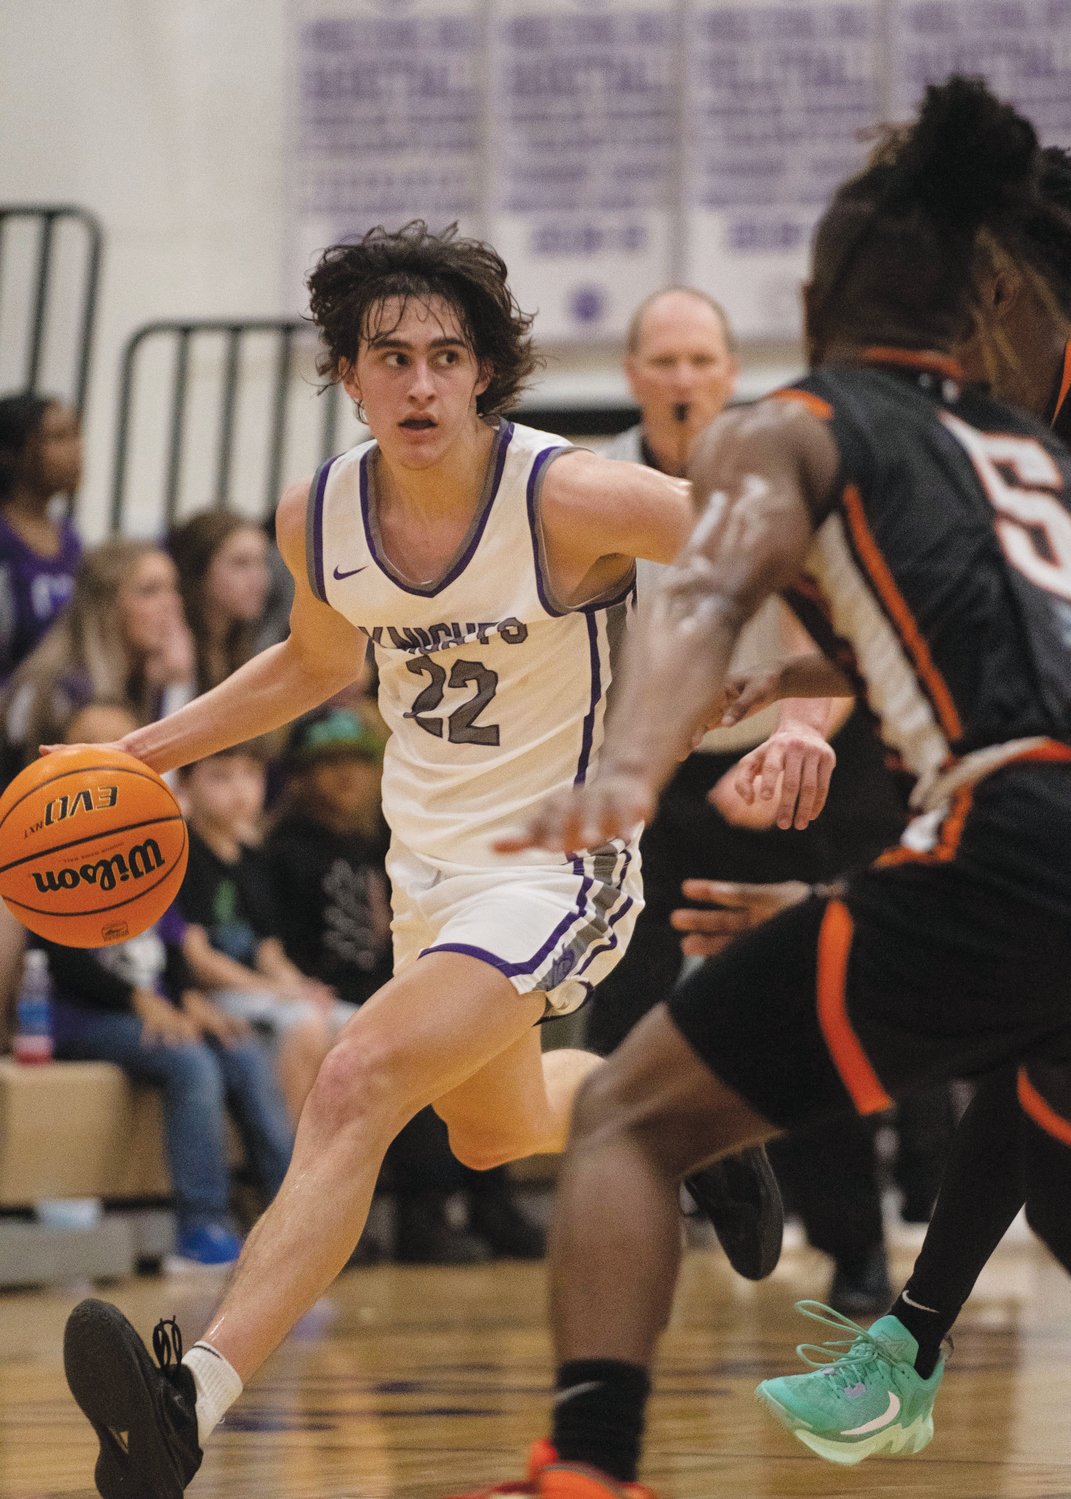 Chatham Charter sophomore Beau Harvey leads his team in both assists (4.9) and steals (4.1) per game while also shooting 43.6% from 3-point range.